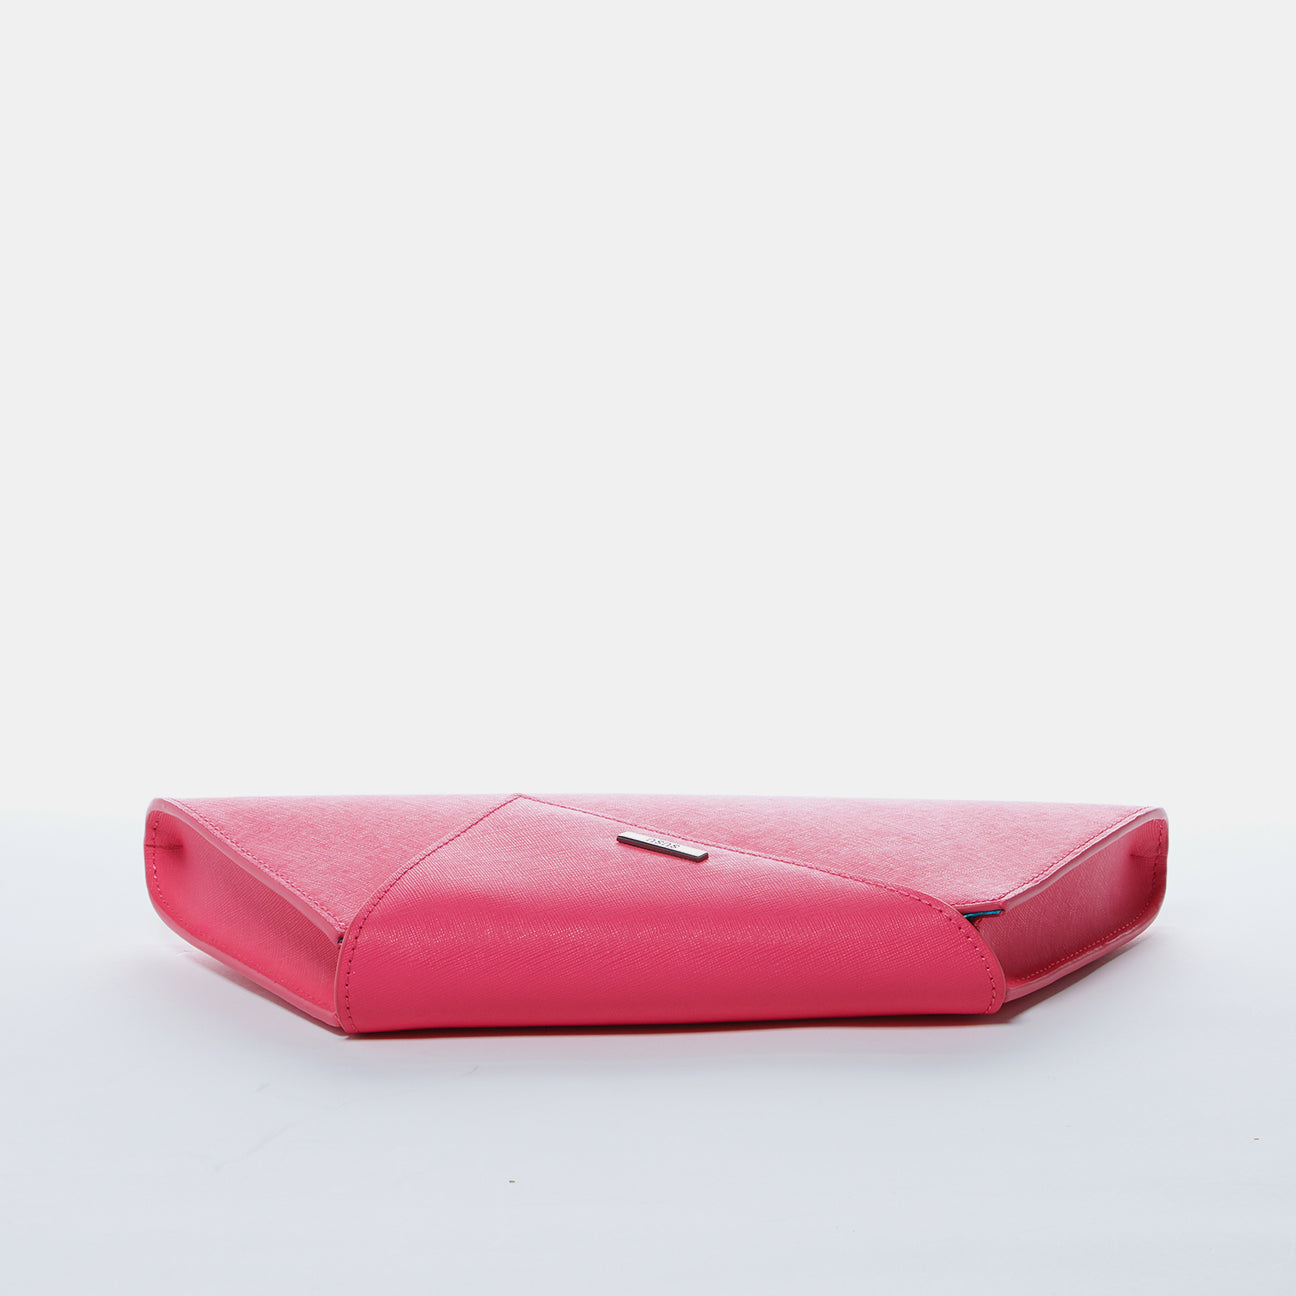 Angelica Hot Pink Leather Clutch Bag